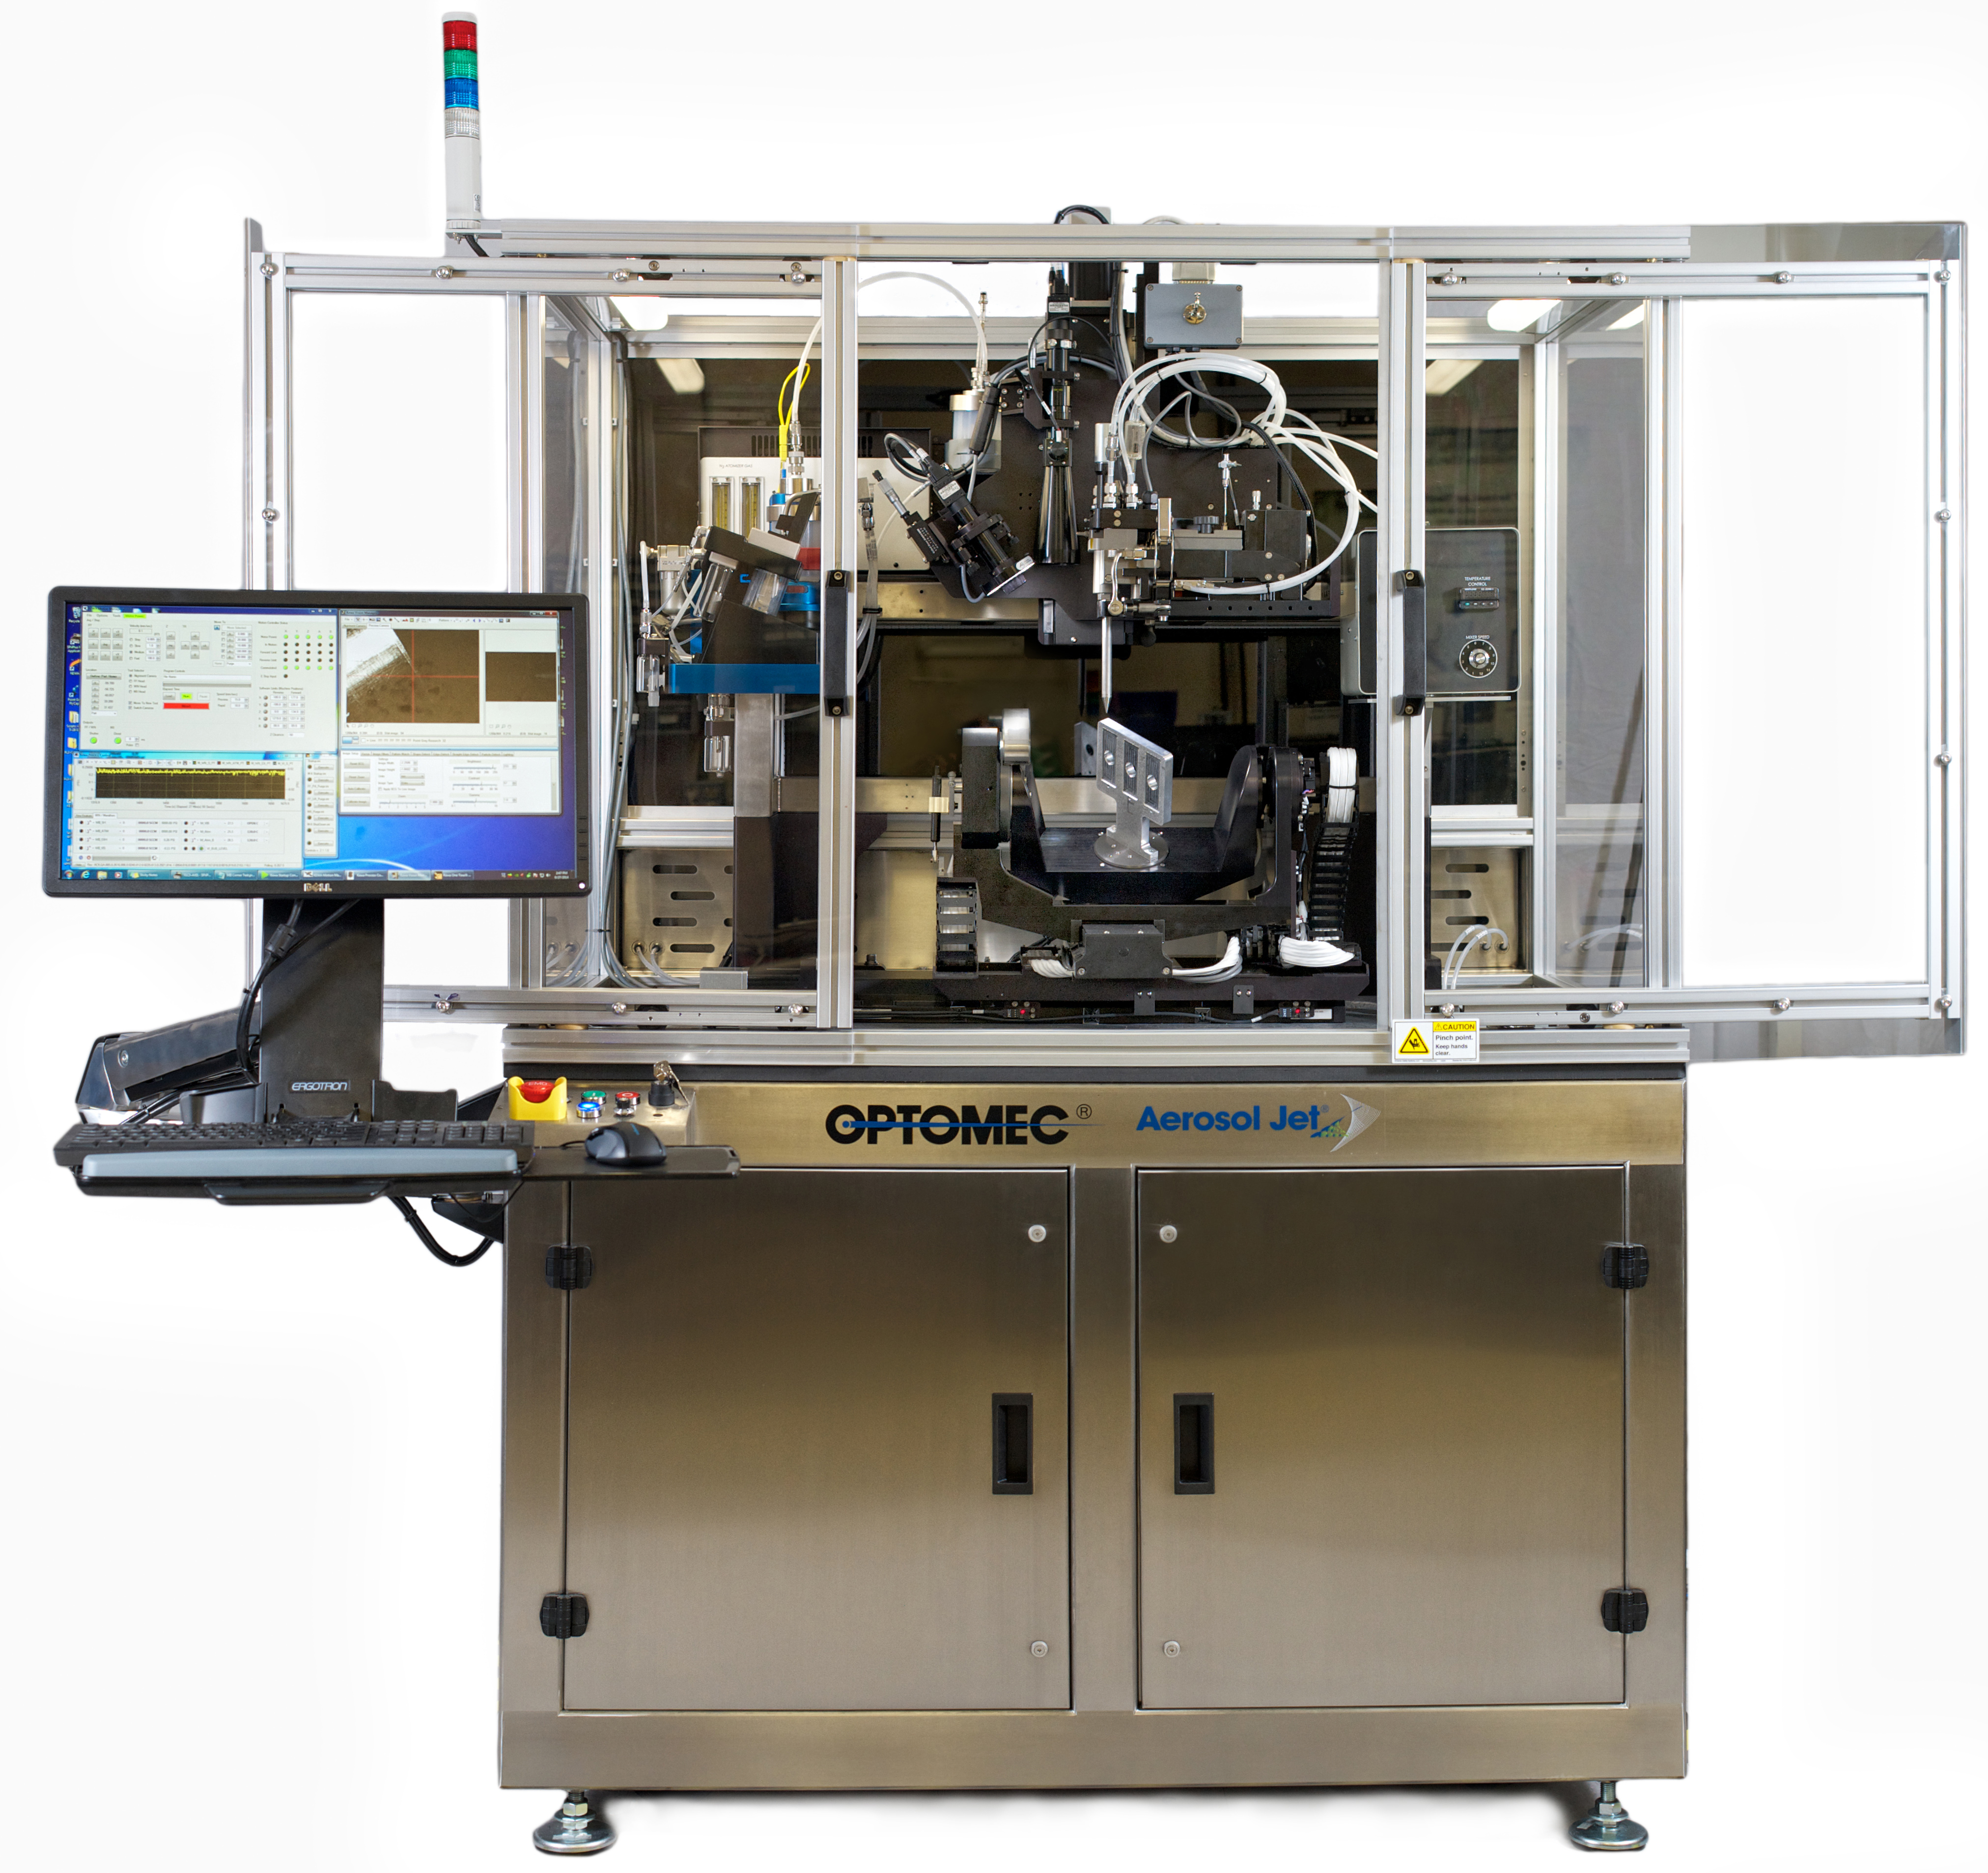 Optomec’s Aerosol Jet 5 Axis System for printing conformal sensors and antennas onto 3D structures. Photo courtesy Business Wire.